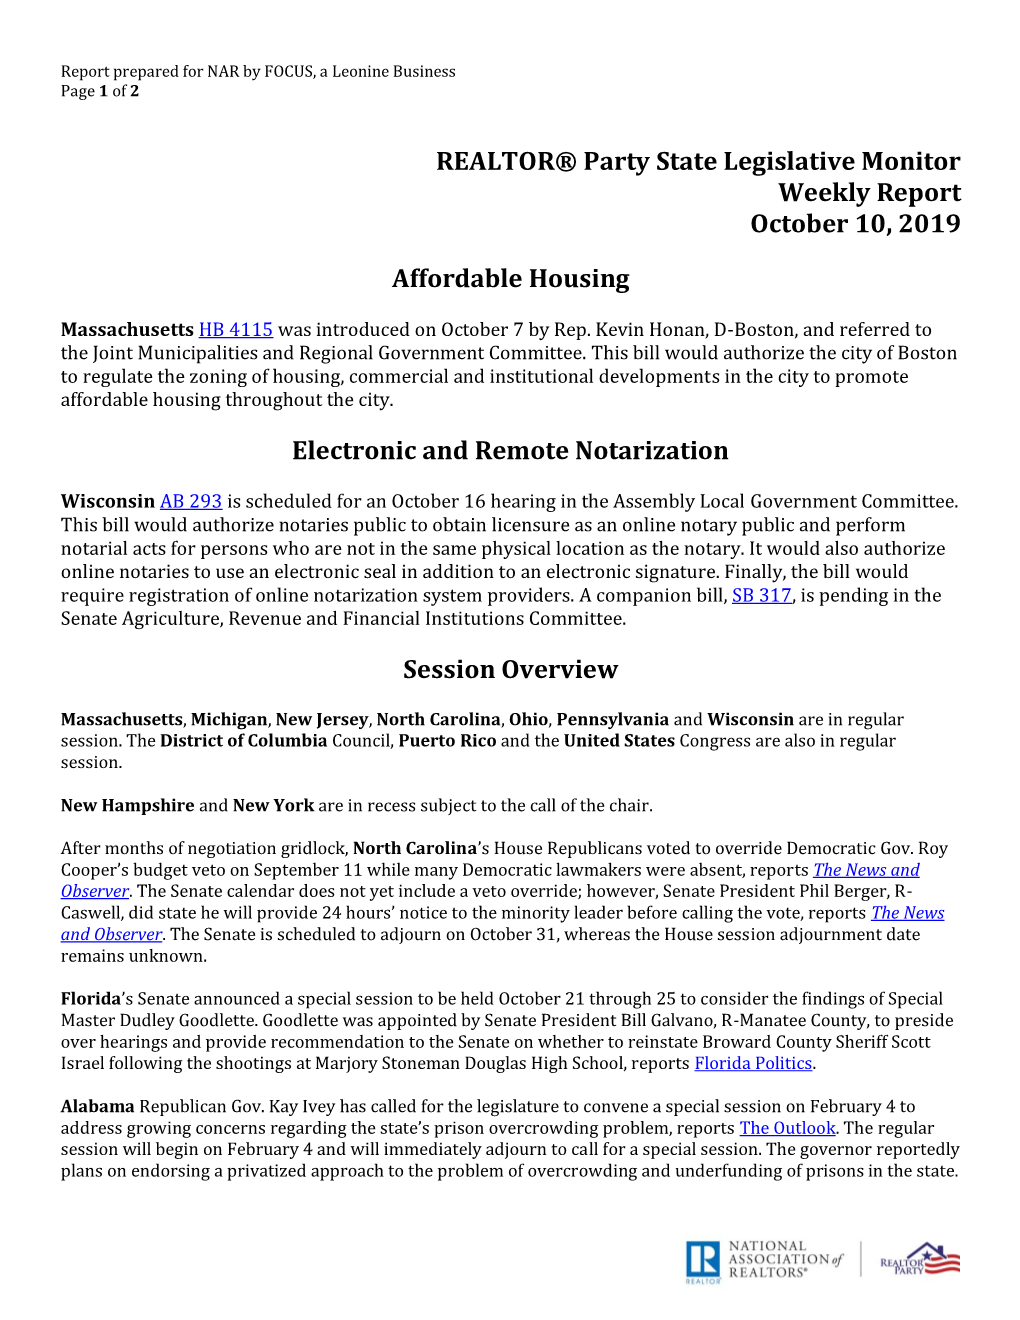 REALTOR® Party State Legislative Monitor Weekly Report October 10, 2019